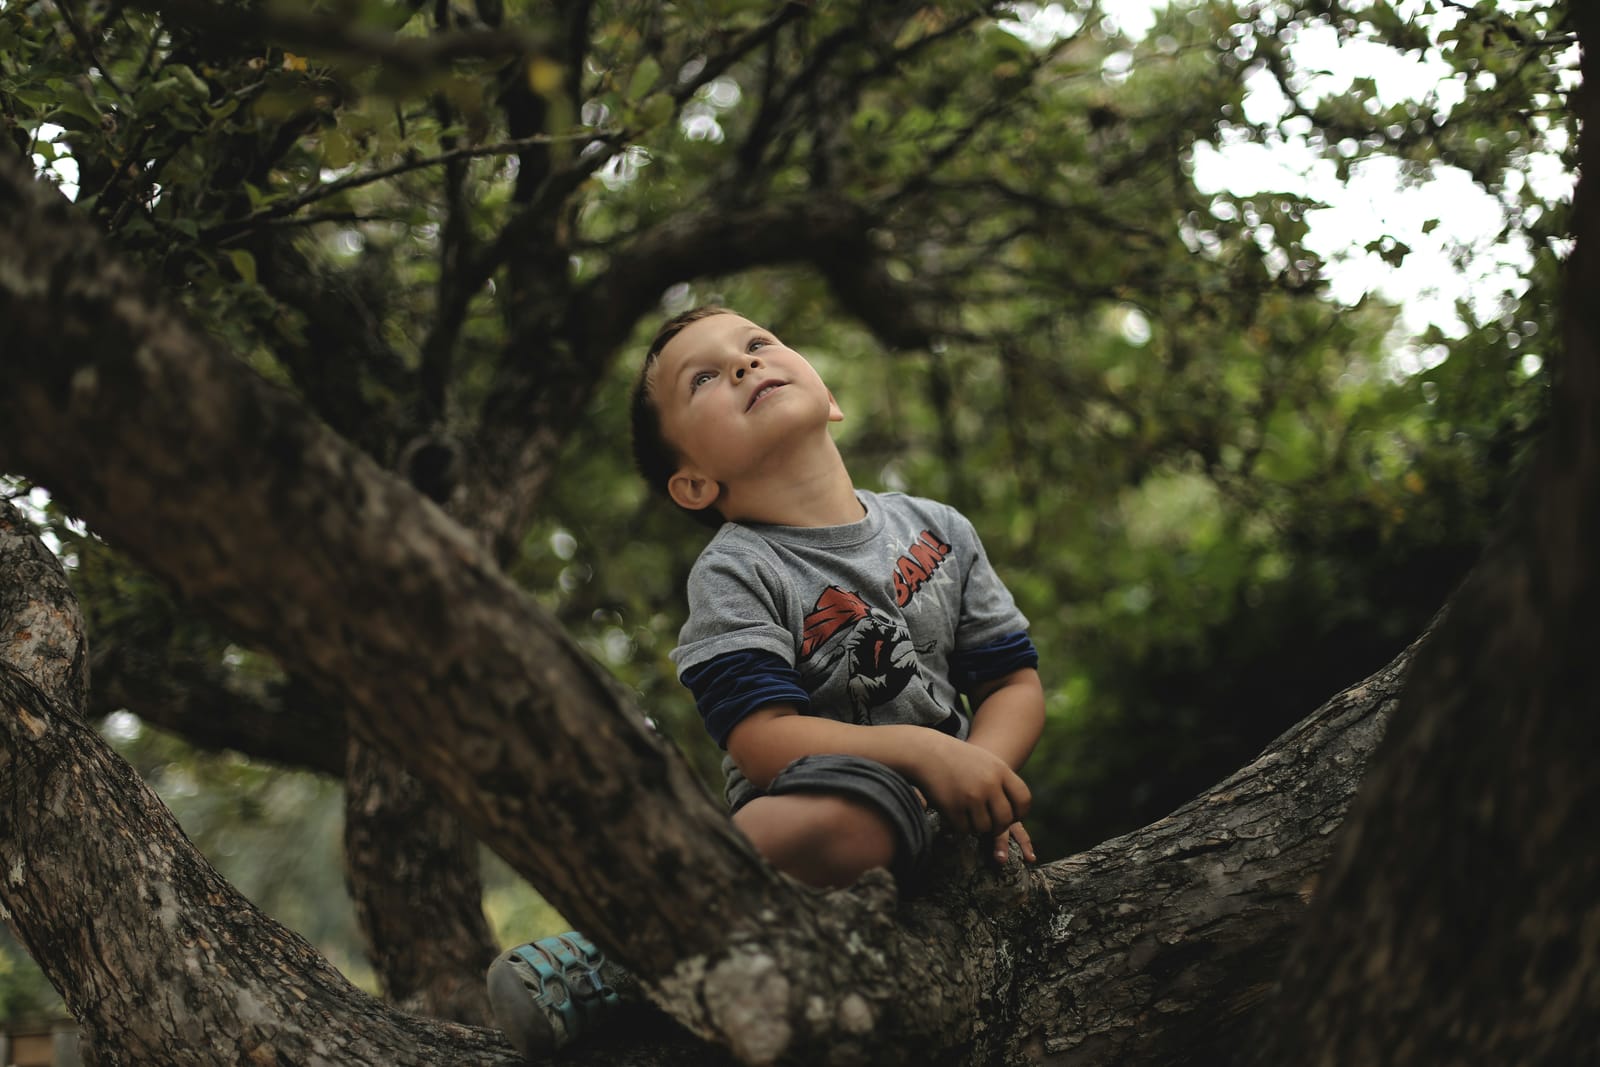 Photograph of a young child sitting in the forked bough of a tree in the summer